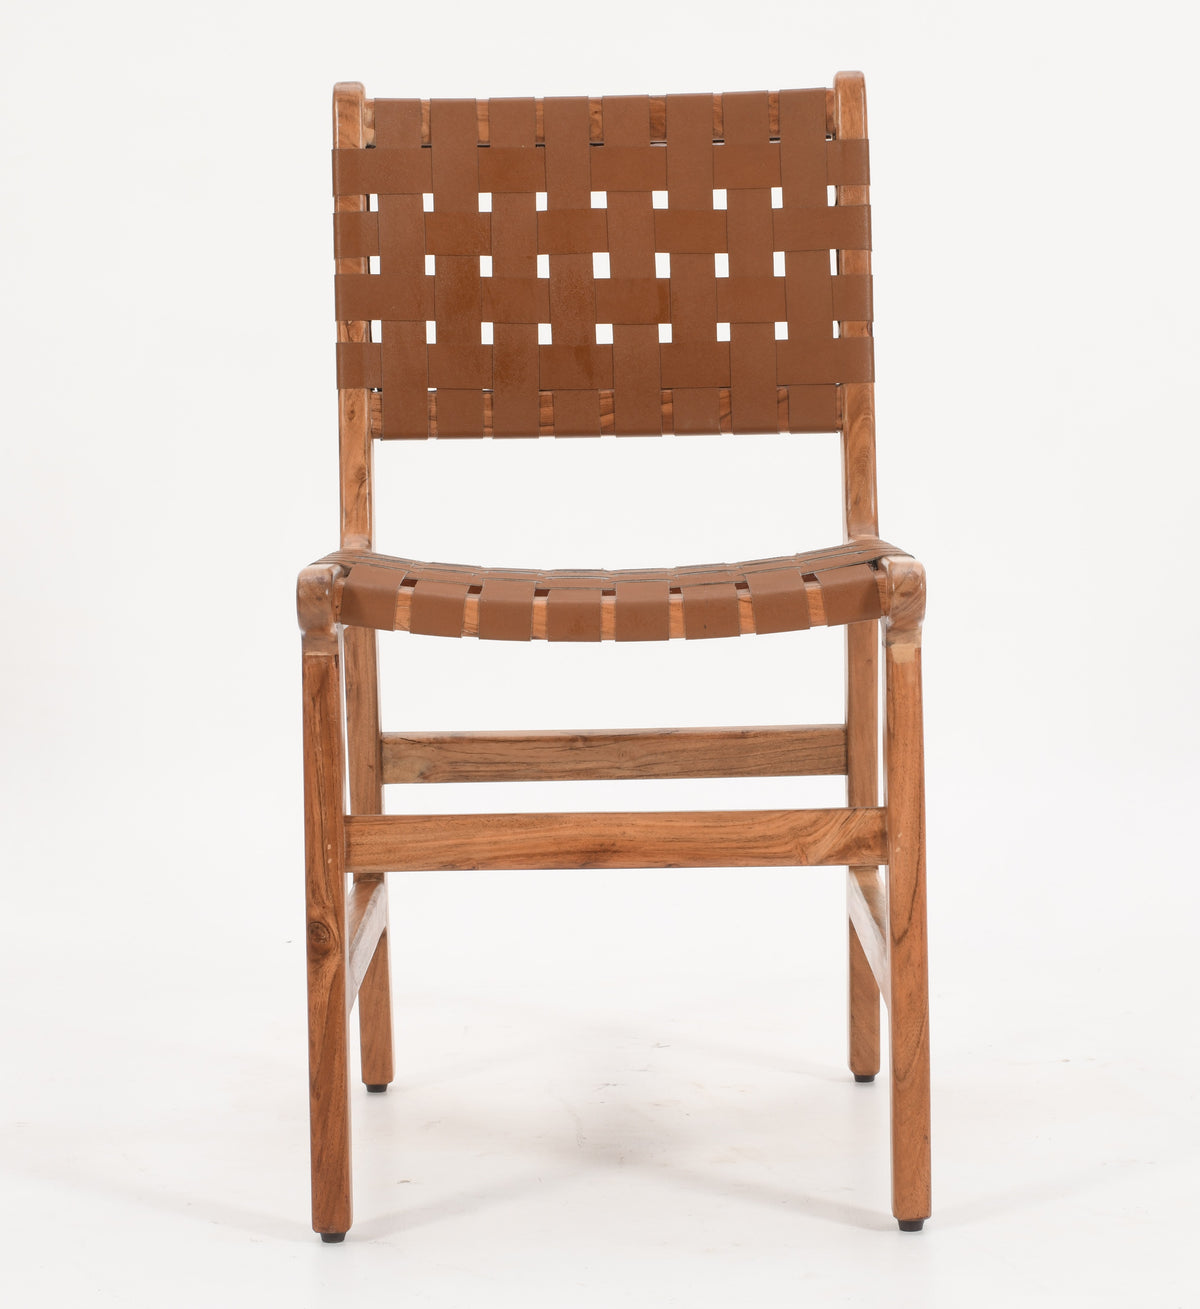 2 x Solid Acacia Wood Dining Chairs | Woven Tan Leather (Set of 2)